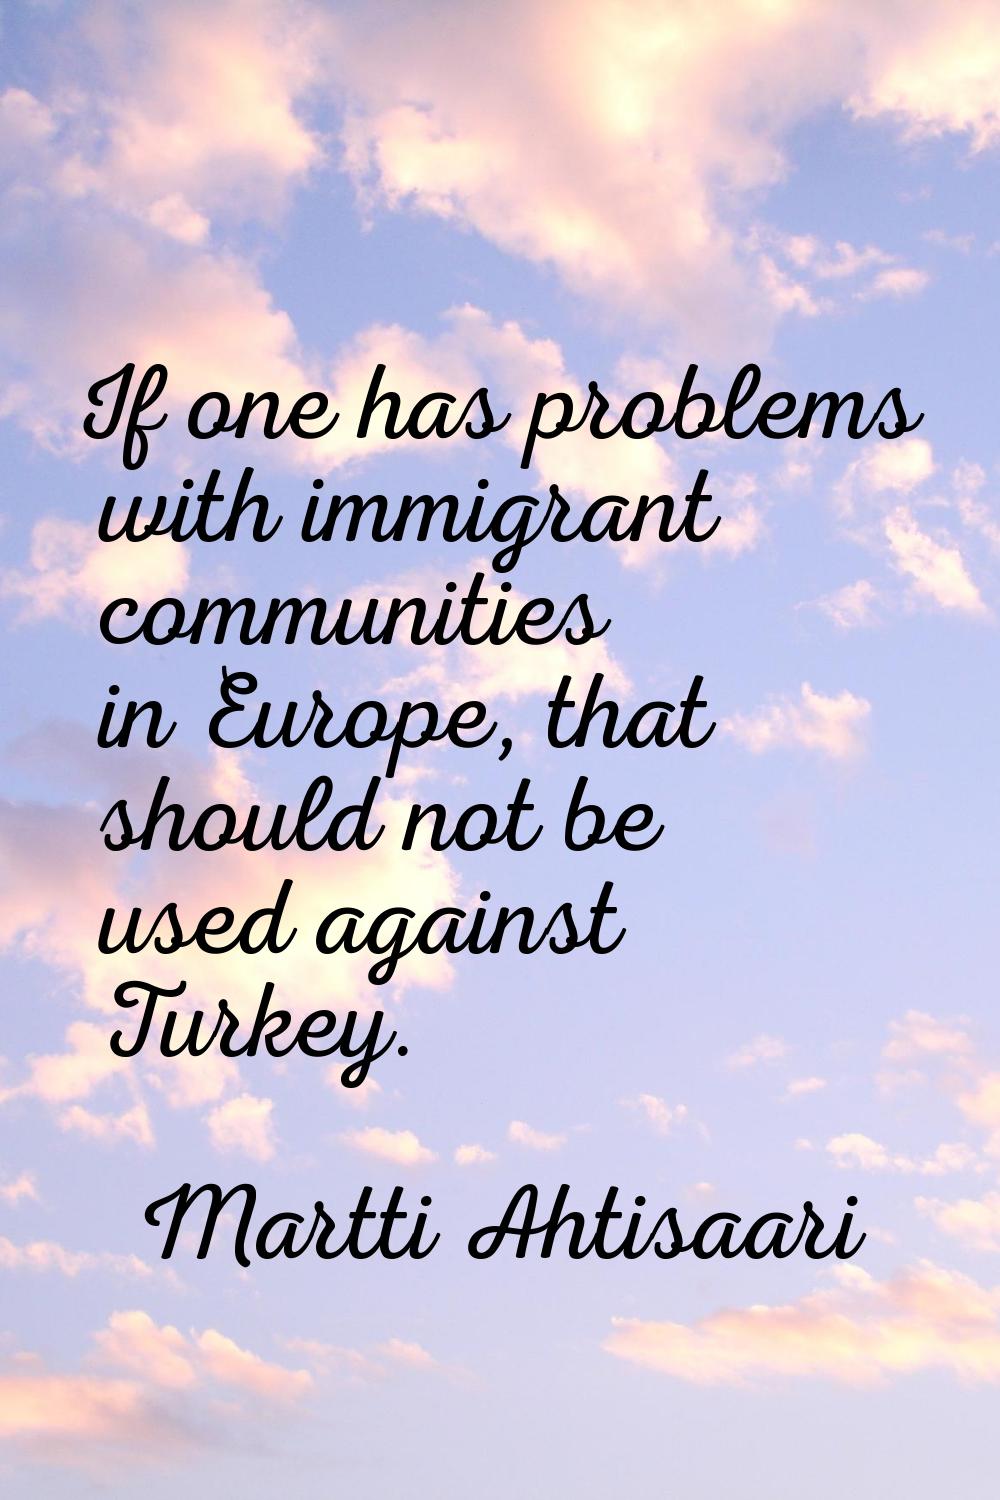 If one has problems with immigrant communities in Europe, that should not be used against Turkey.